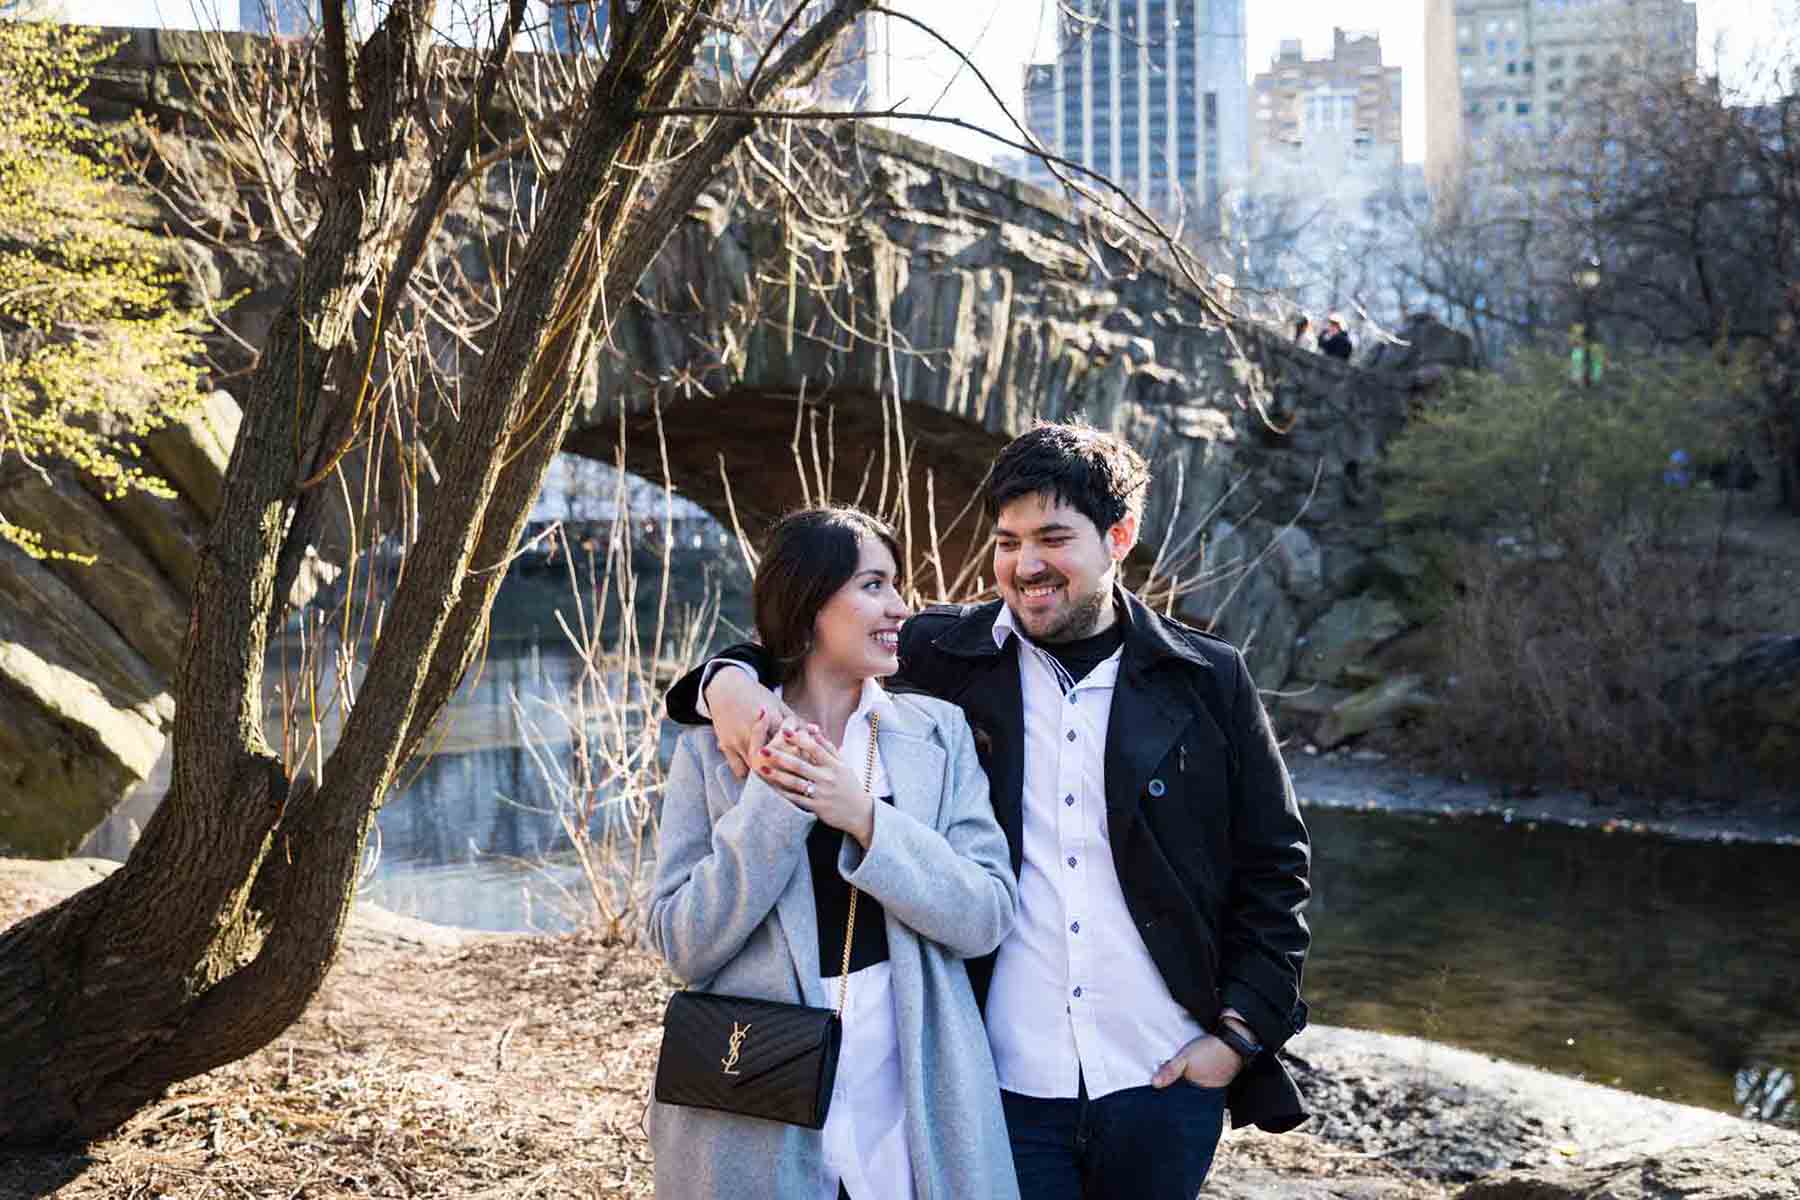 Couple walking in front of bridge with man's arm around woman during a Central Park surprise proposal